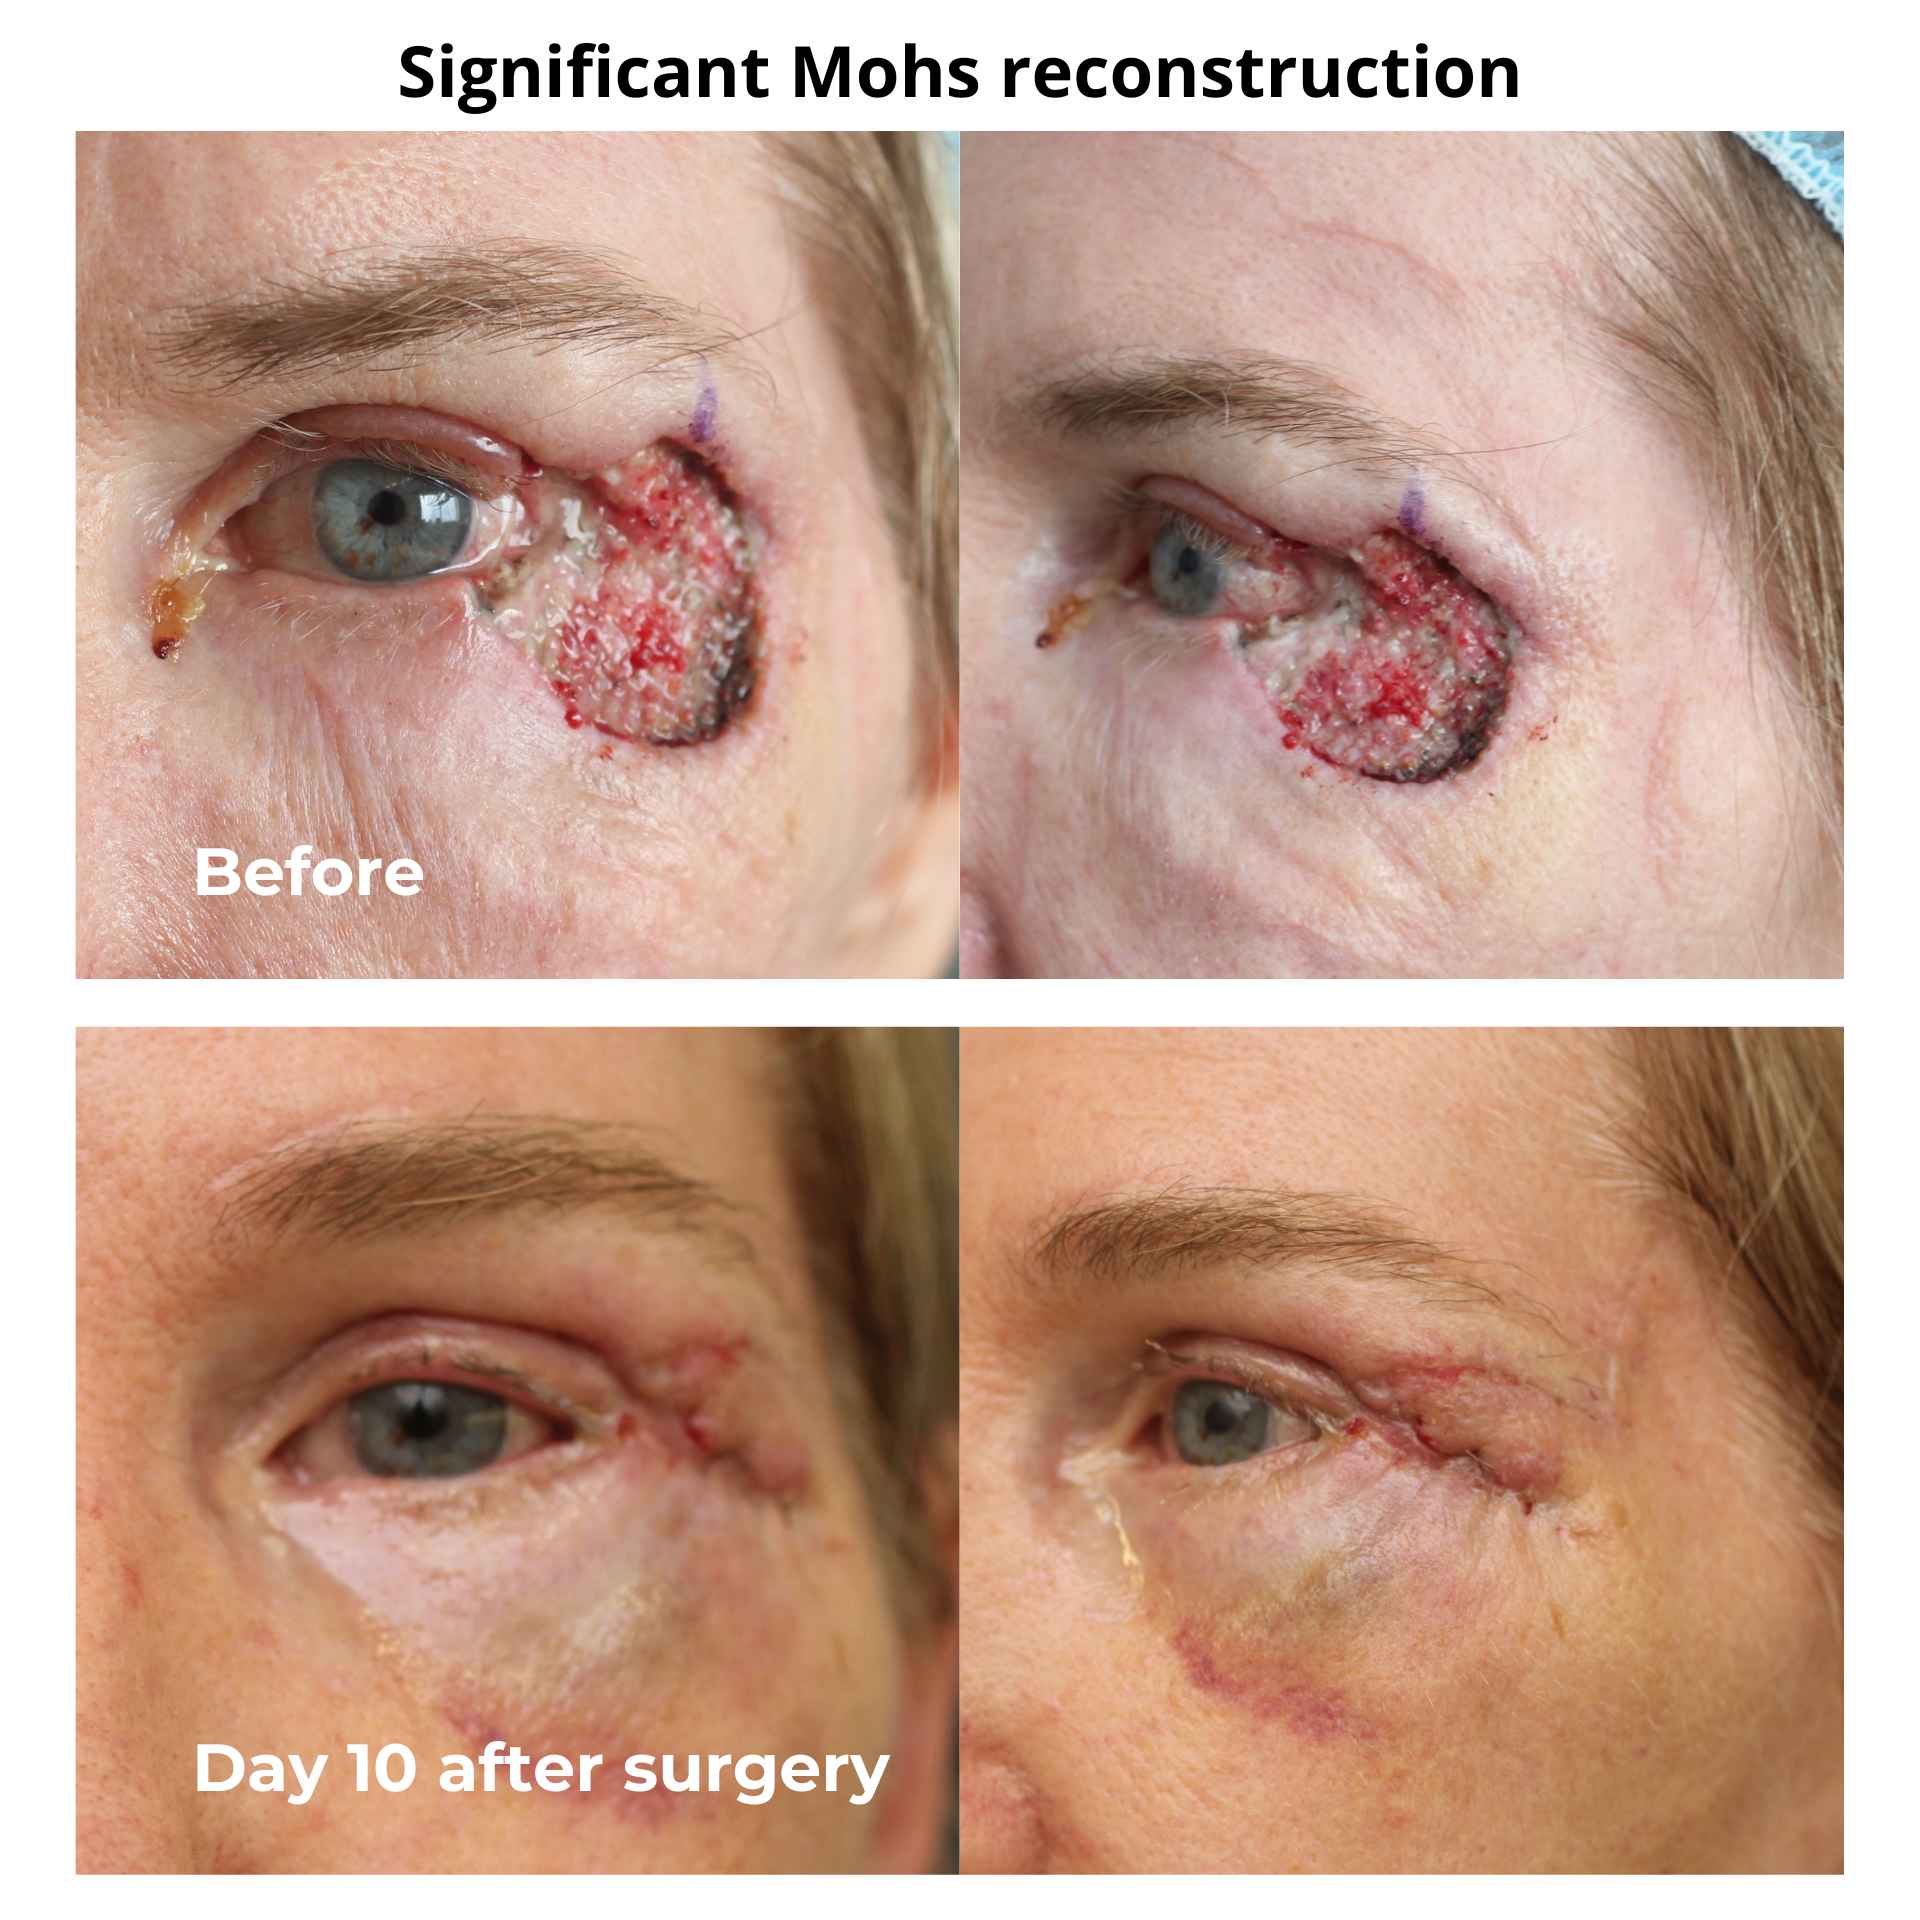 Invasive cancer involving the upper and lower lid. This is just 10 days post Mohs reconstruction surgery by Dr Anthony Maloof.